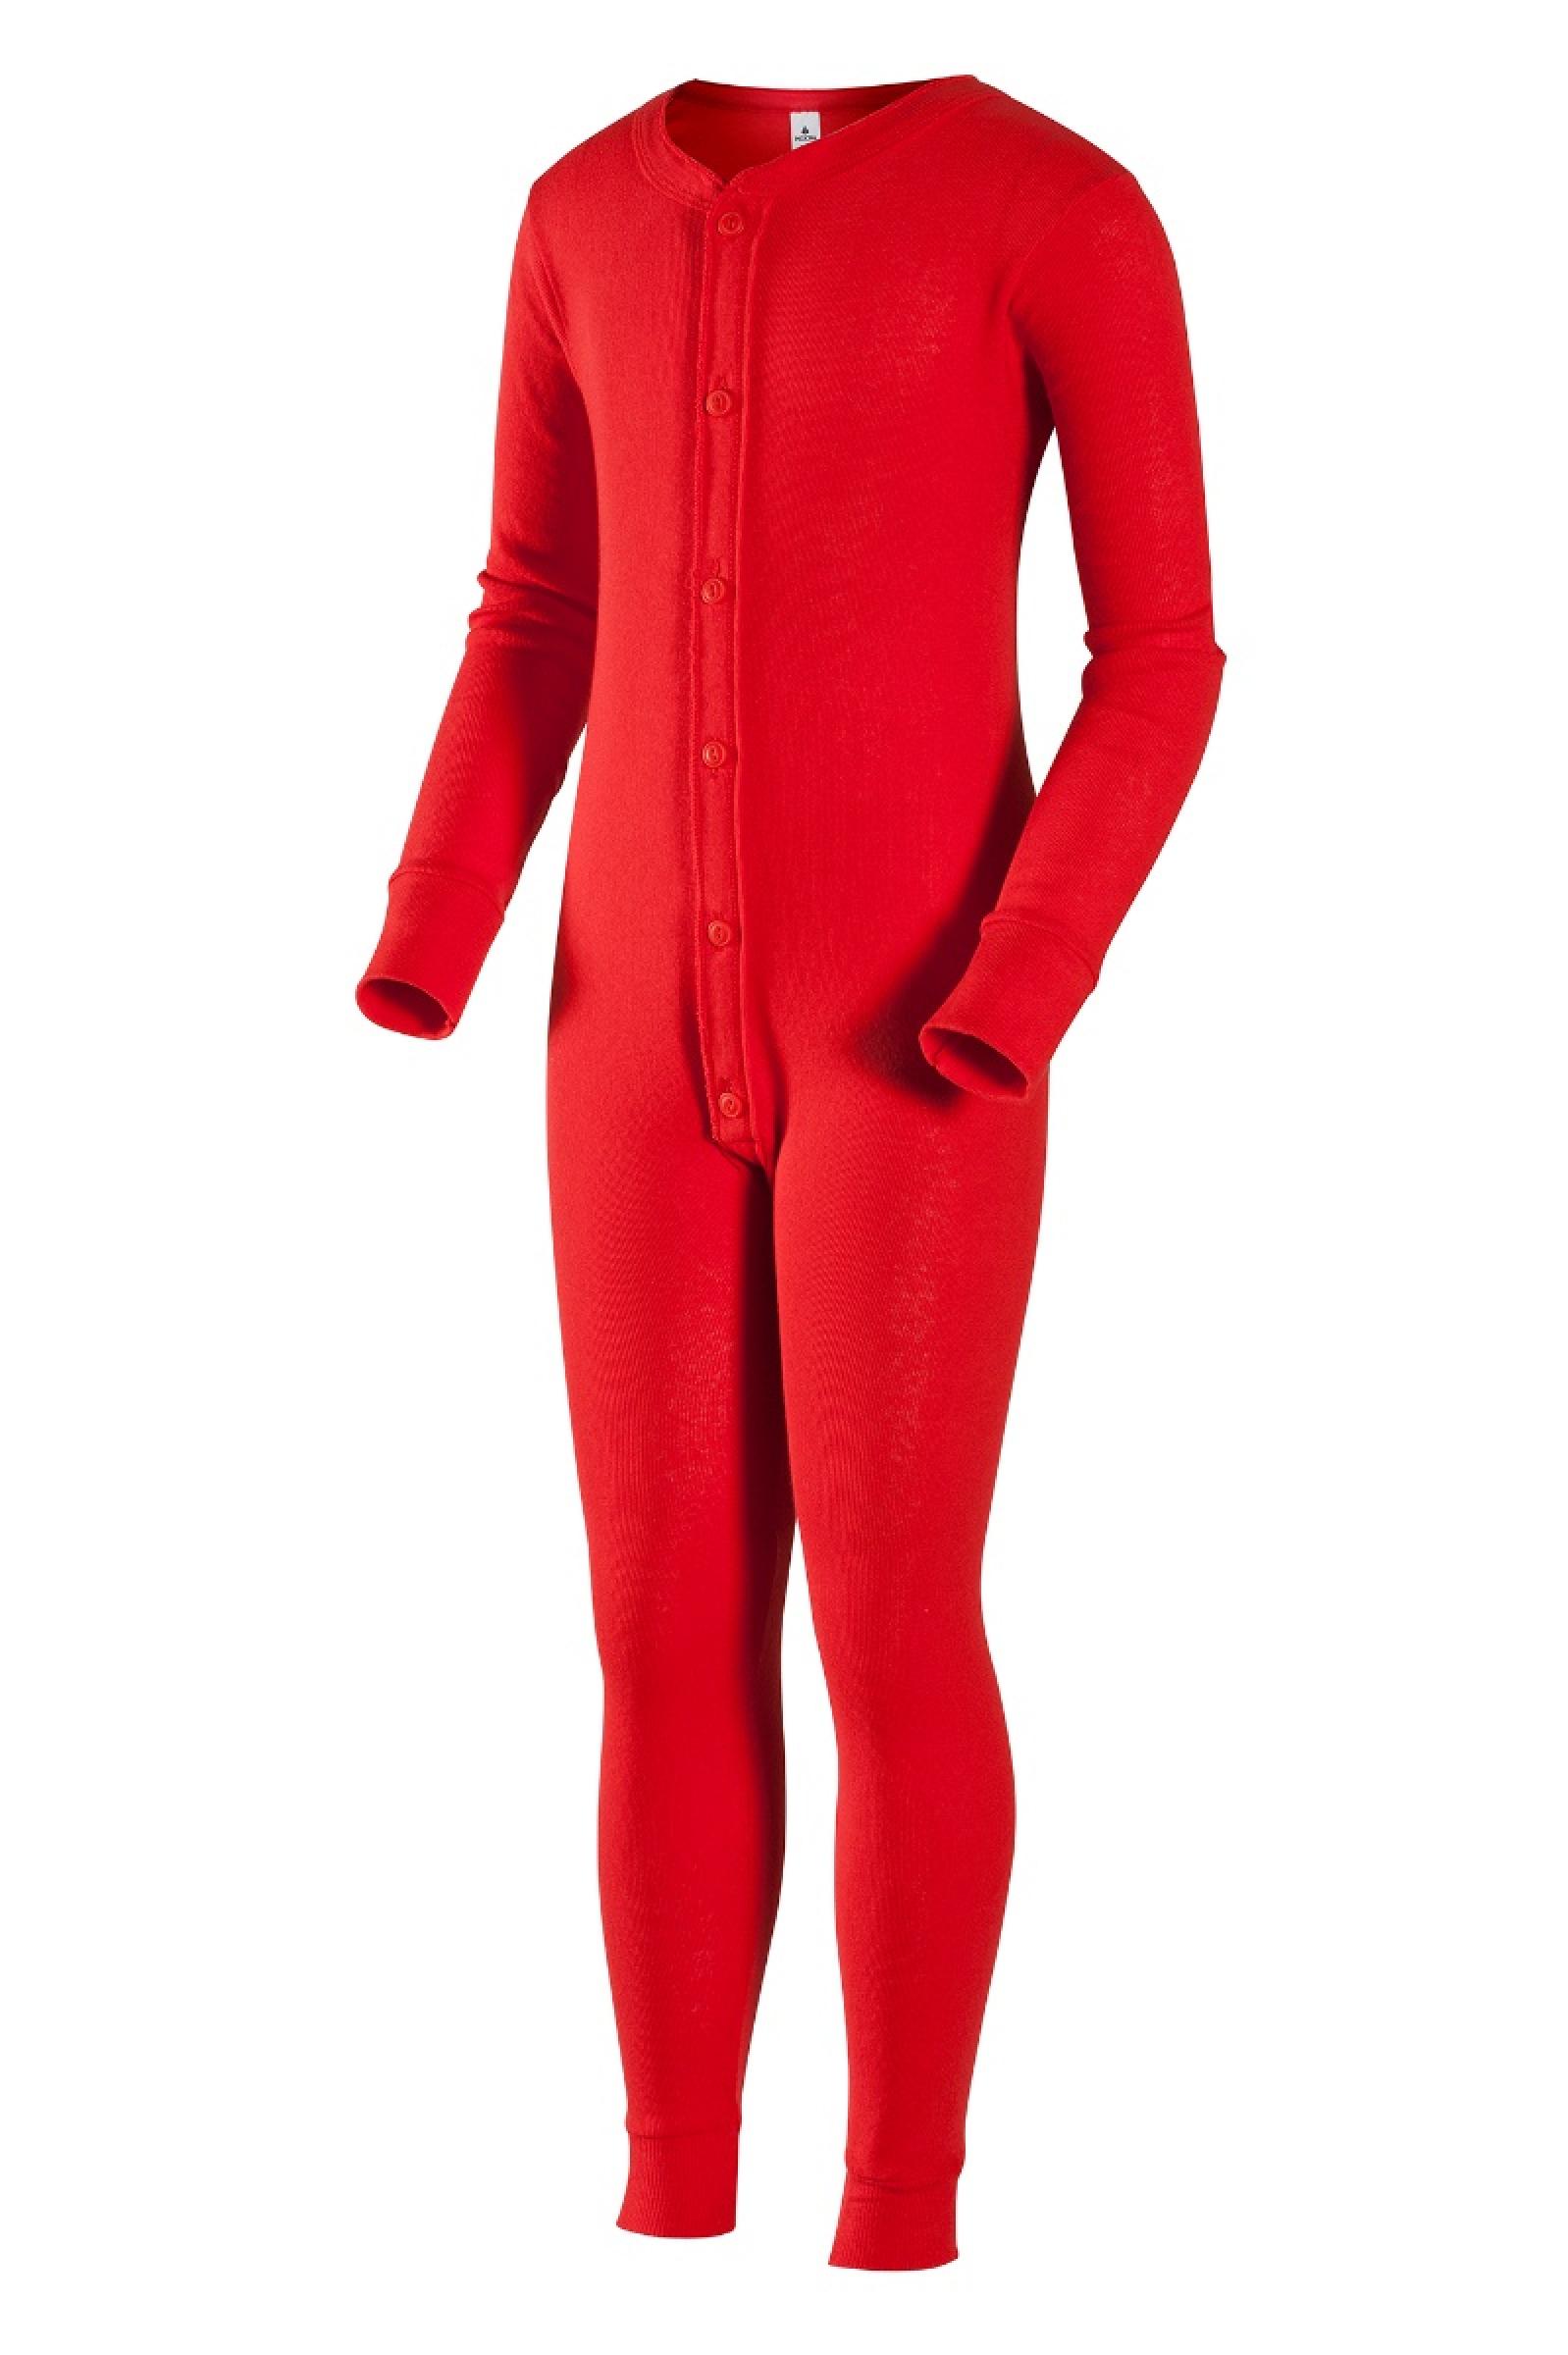 Indera Youth Thermal Unionsuit  